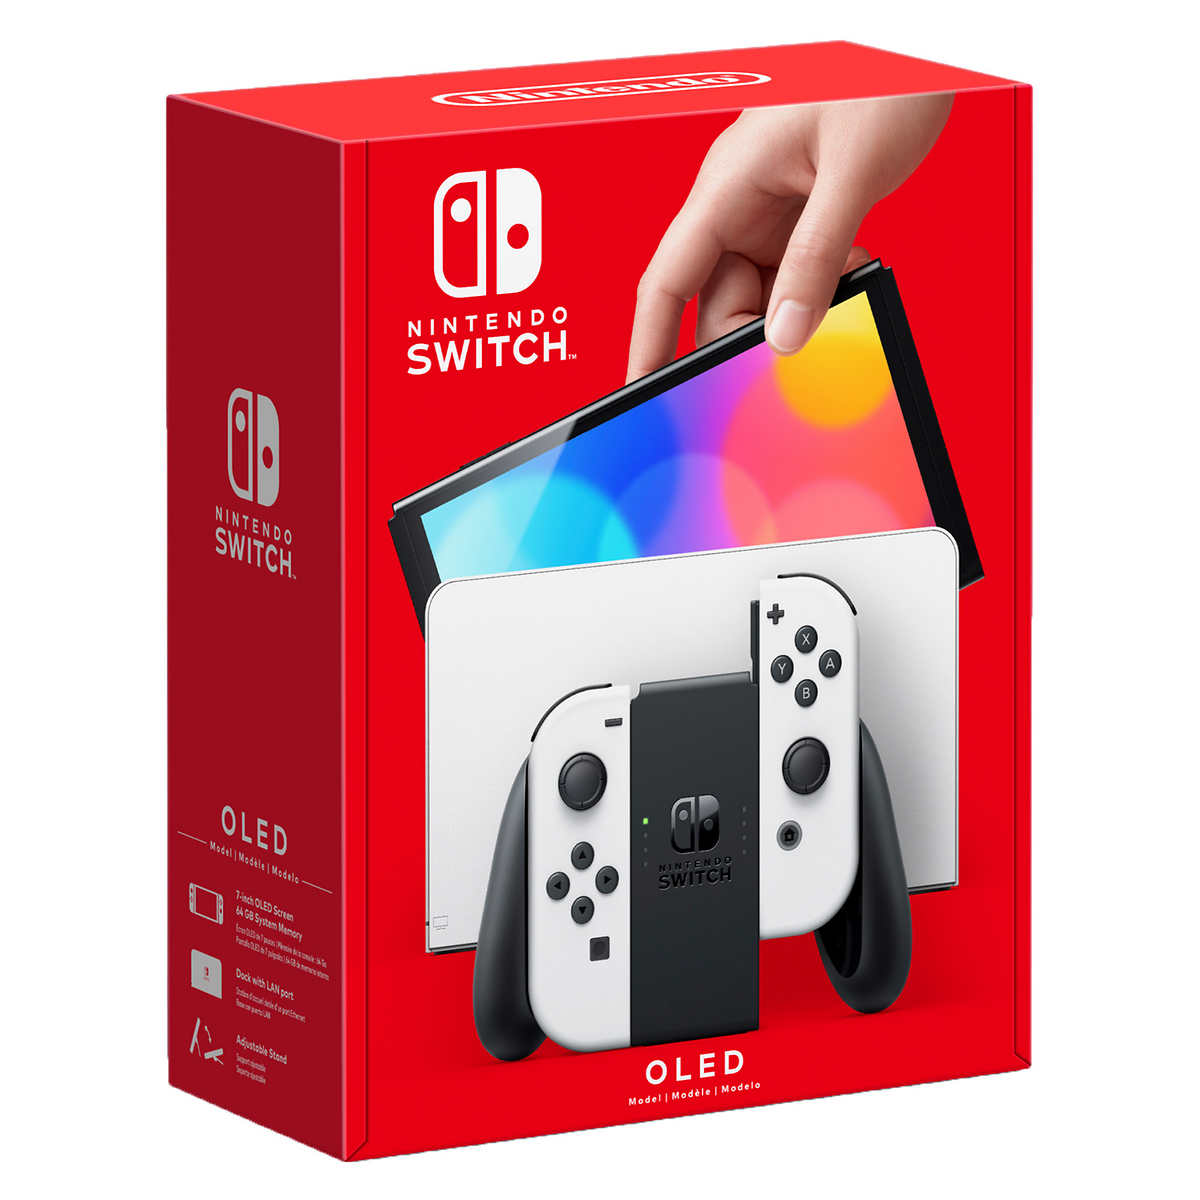 Back in Stock - Nintendo Switch OLED Bundle at Costco with Metroid Dread - $419.99